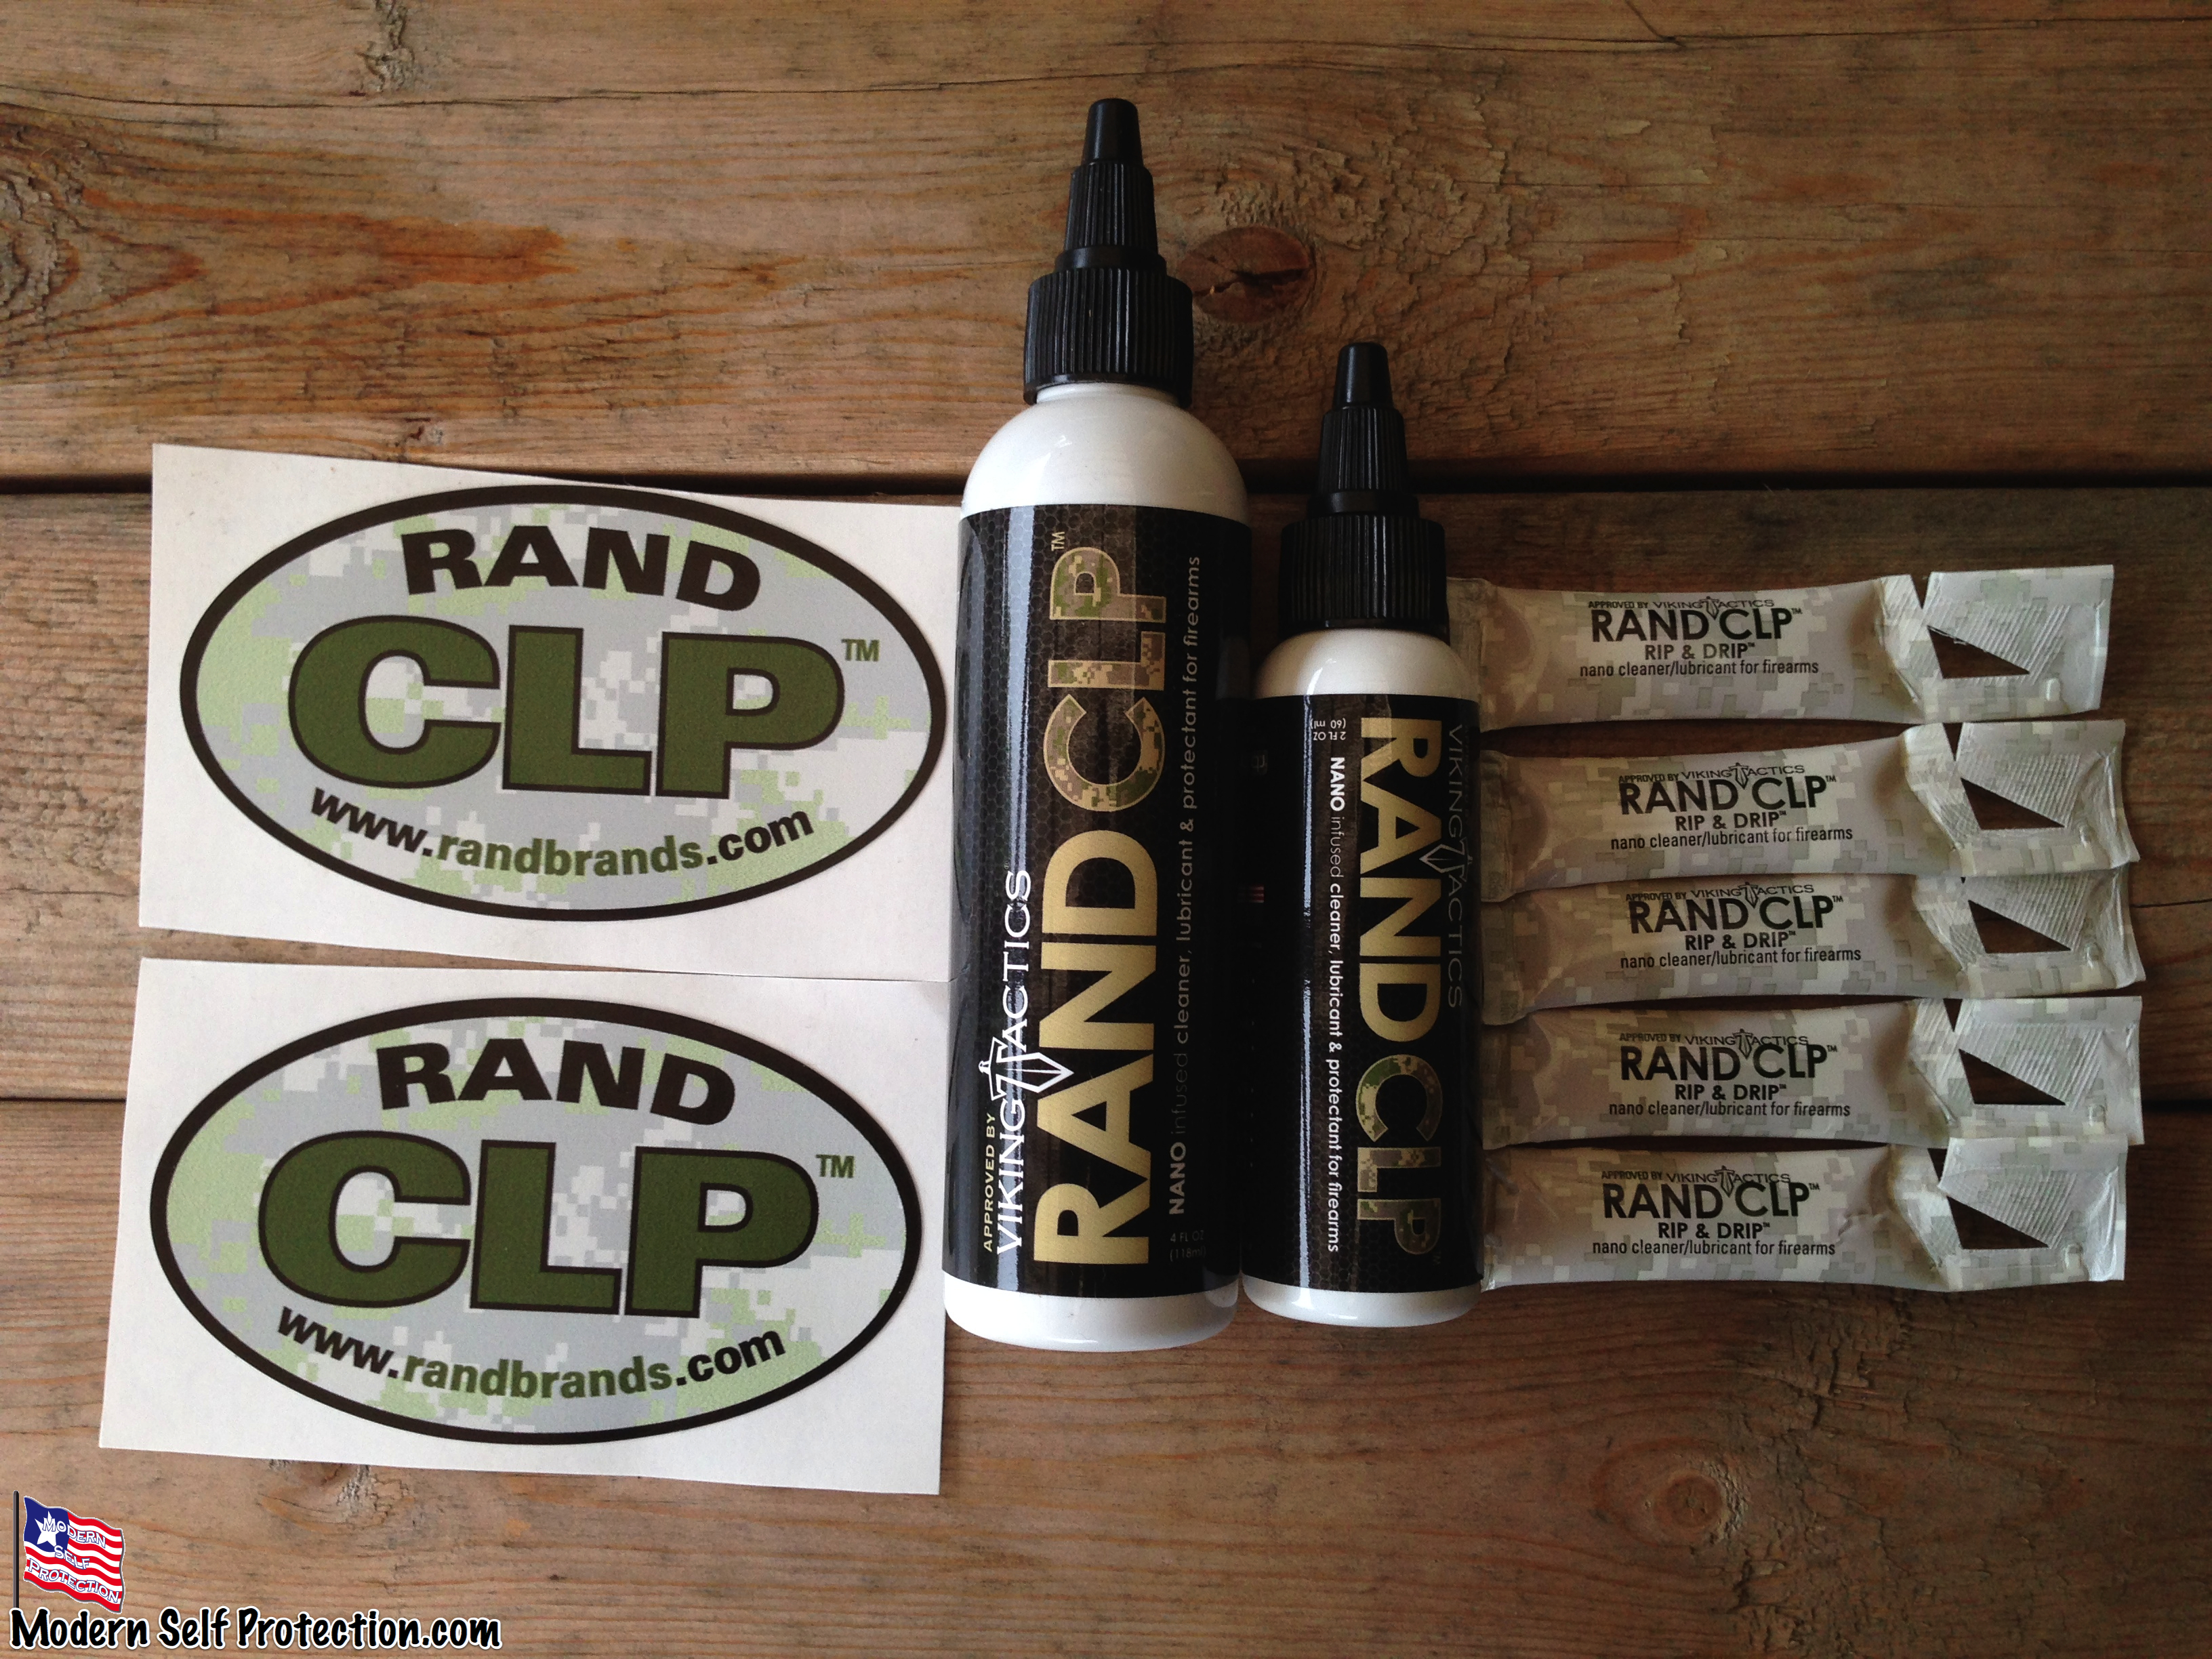 Rand CLP Care Package